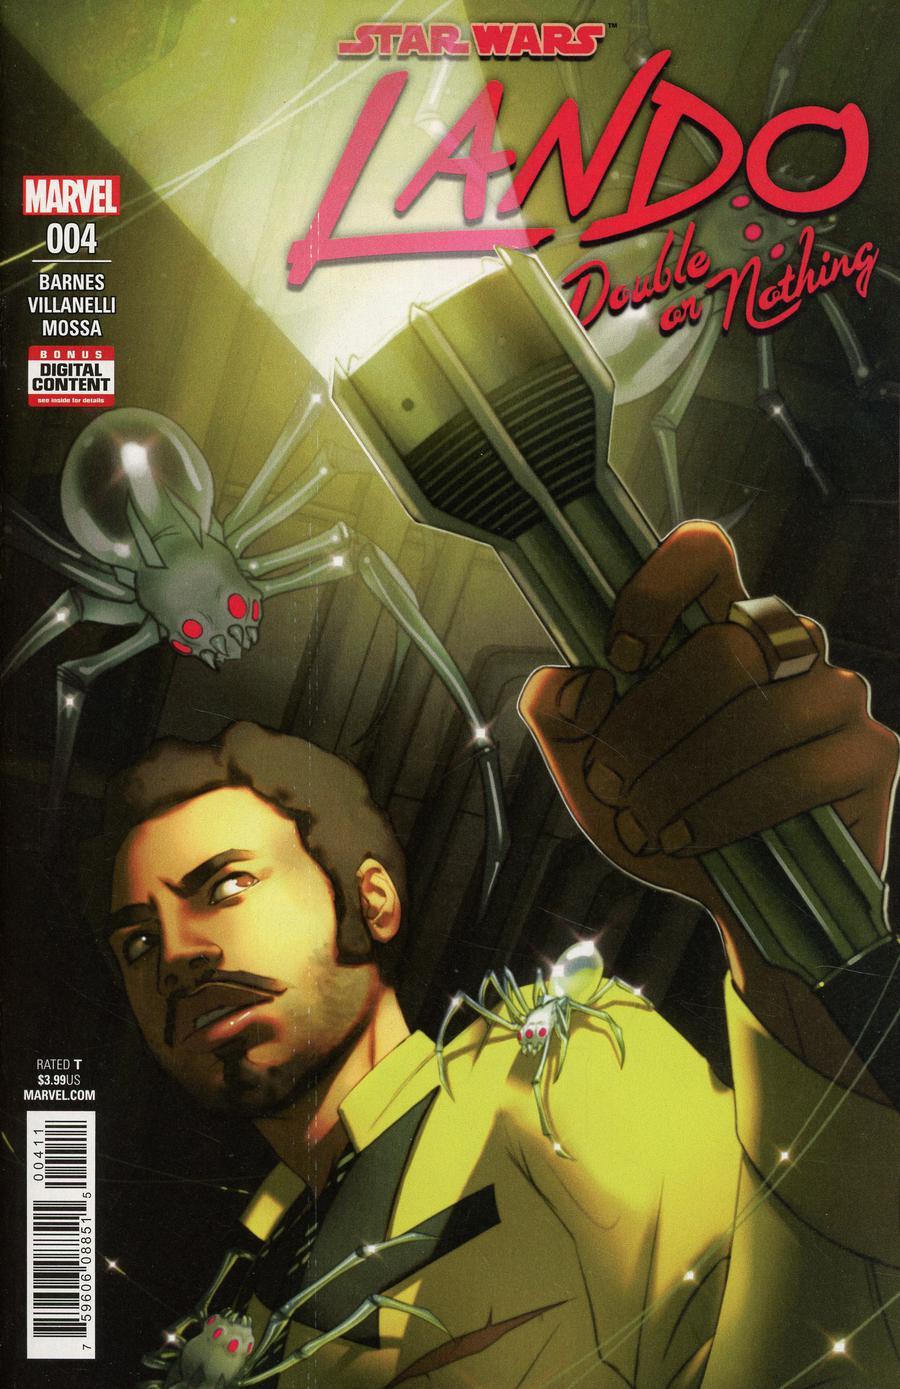 Star Wars Lando Double Or Nothing Vol. 1 #4